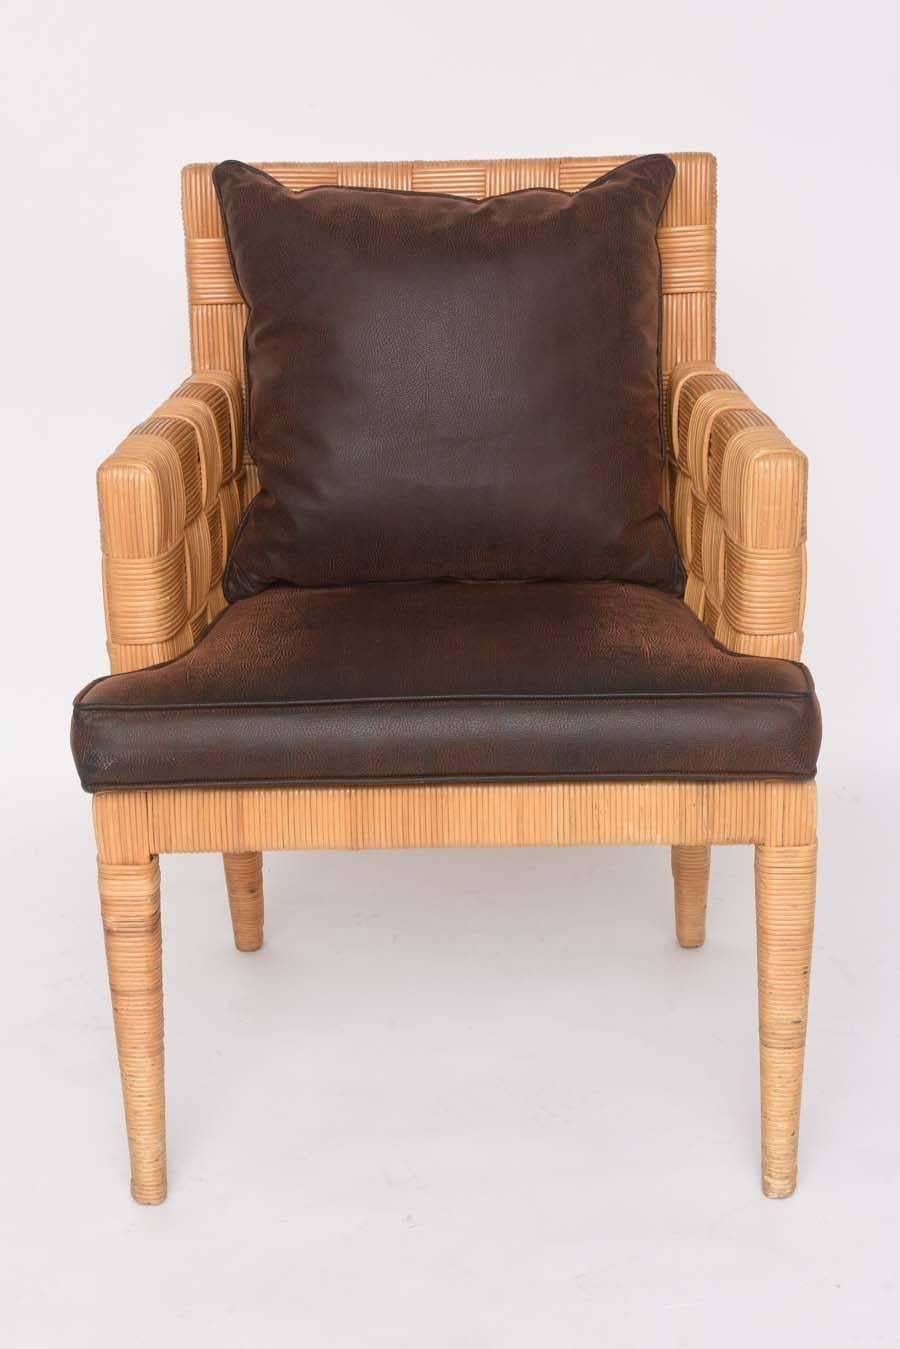 This pair of chairs by Angelo Donghia are from the "Block Island" collection and make for the perfect side chair or dining chair.

The upholstered cushion and pillow are in a textured faux-leather.

For best net trade price or